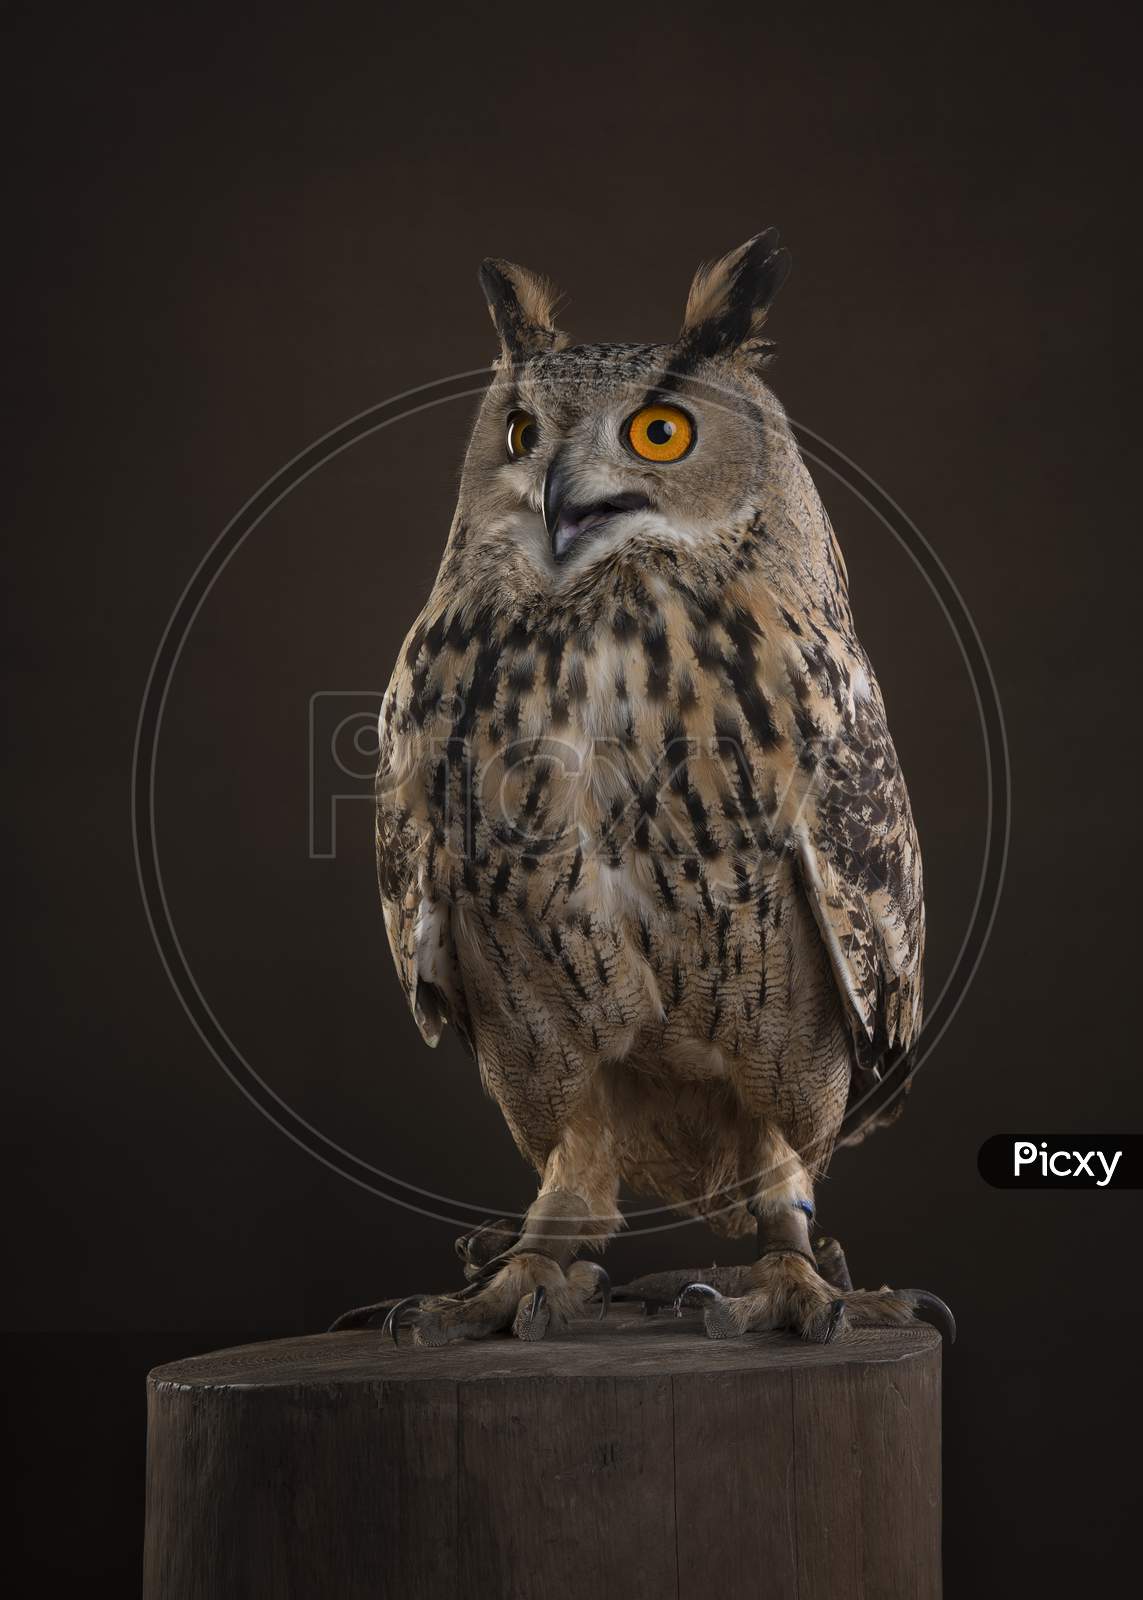 Eagle Owl Sitting On A Tree Trunk On A Dark Brown Background